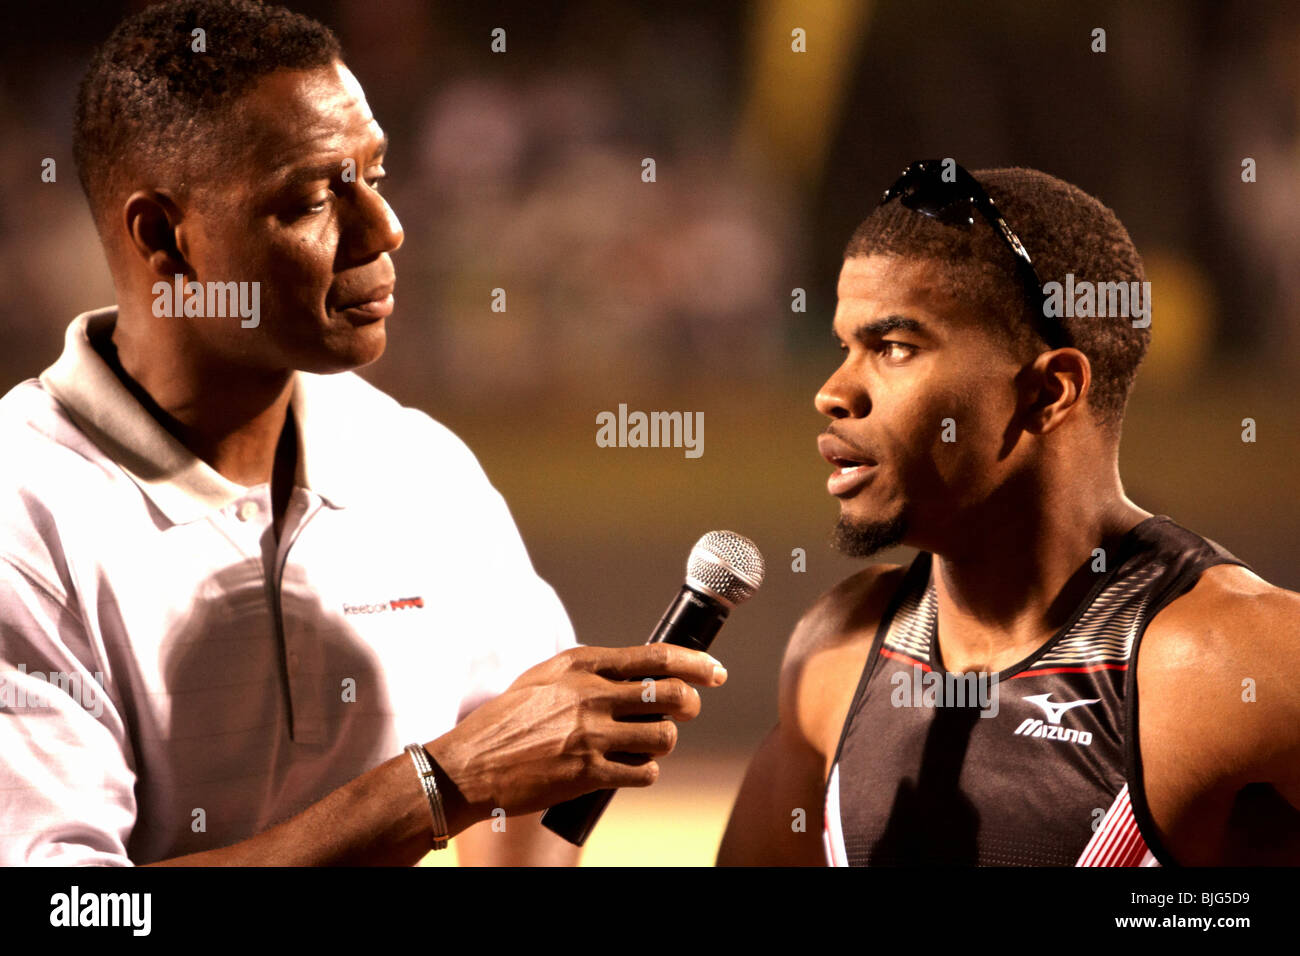 USA's Terrence Trammell being interviewed by Lewis Johnson after winning the Men's 110m Hurdles, finishing in 13.11sec. Stock Photo